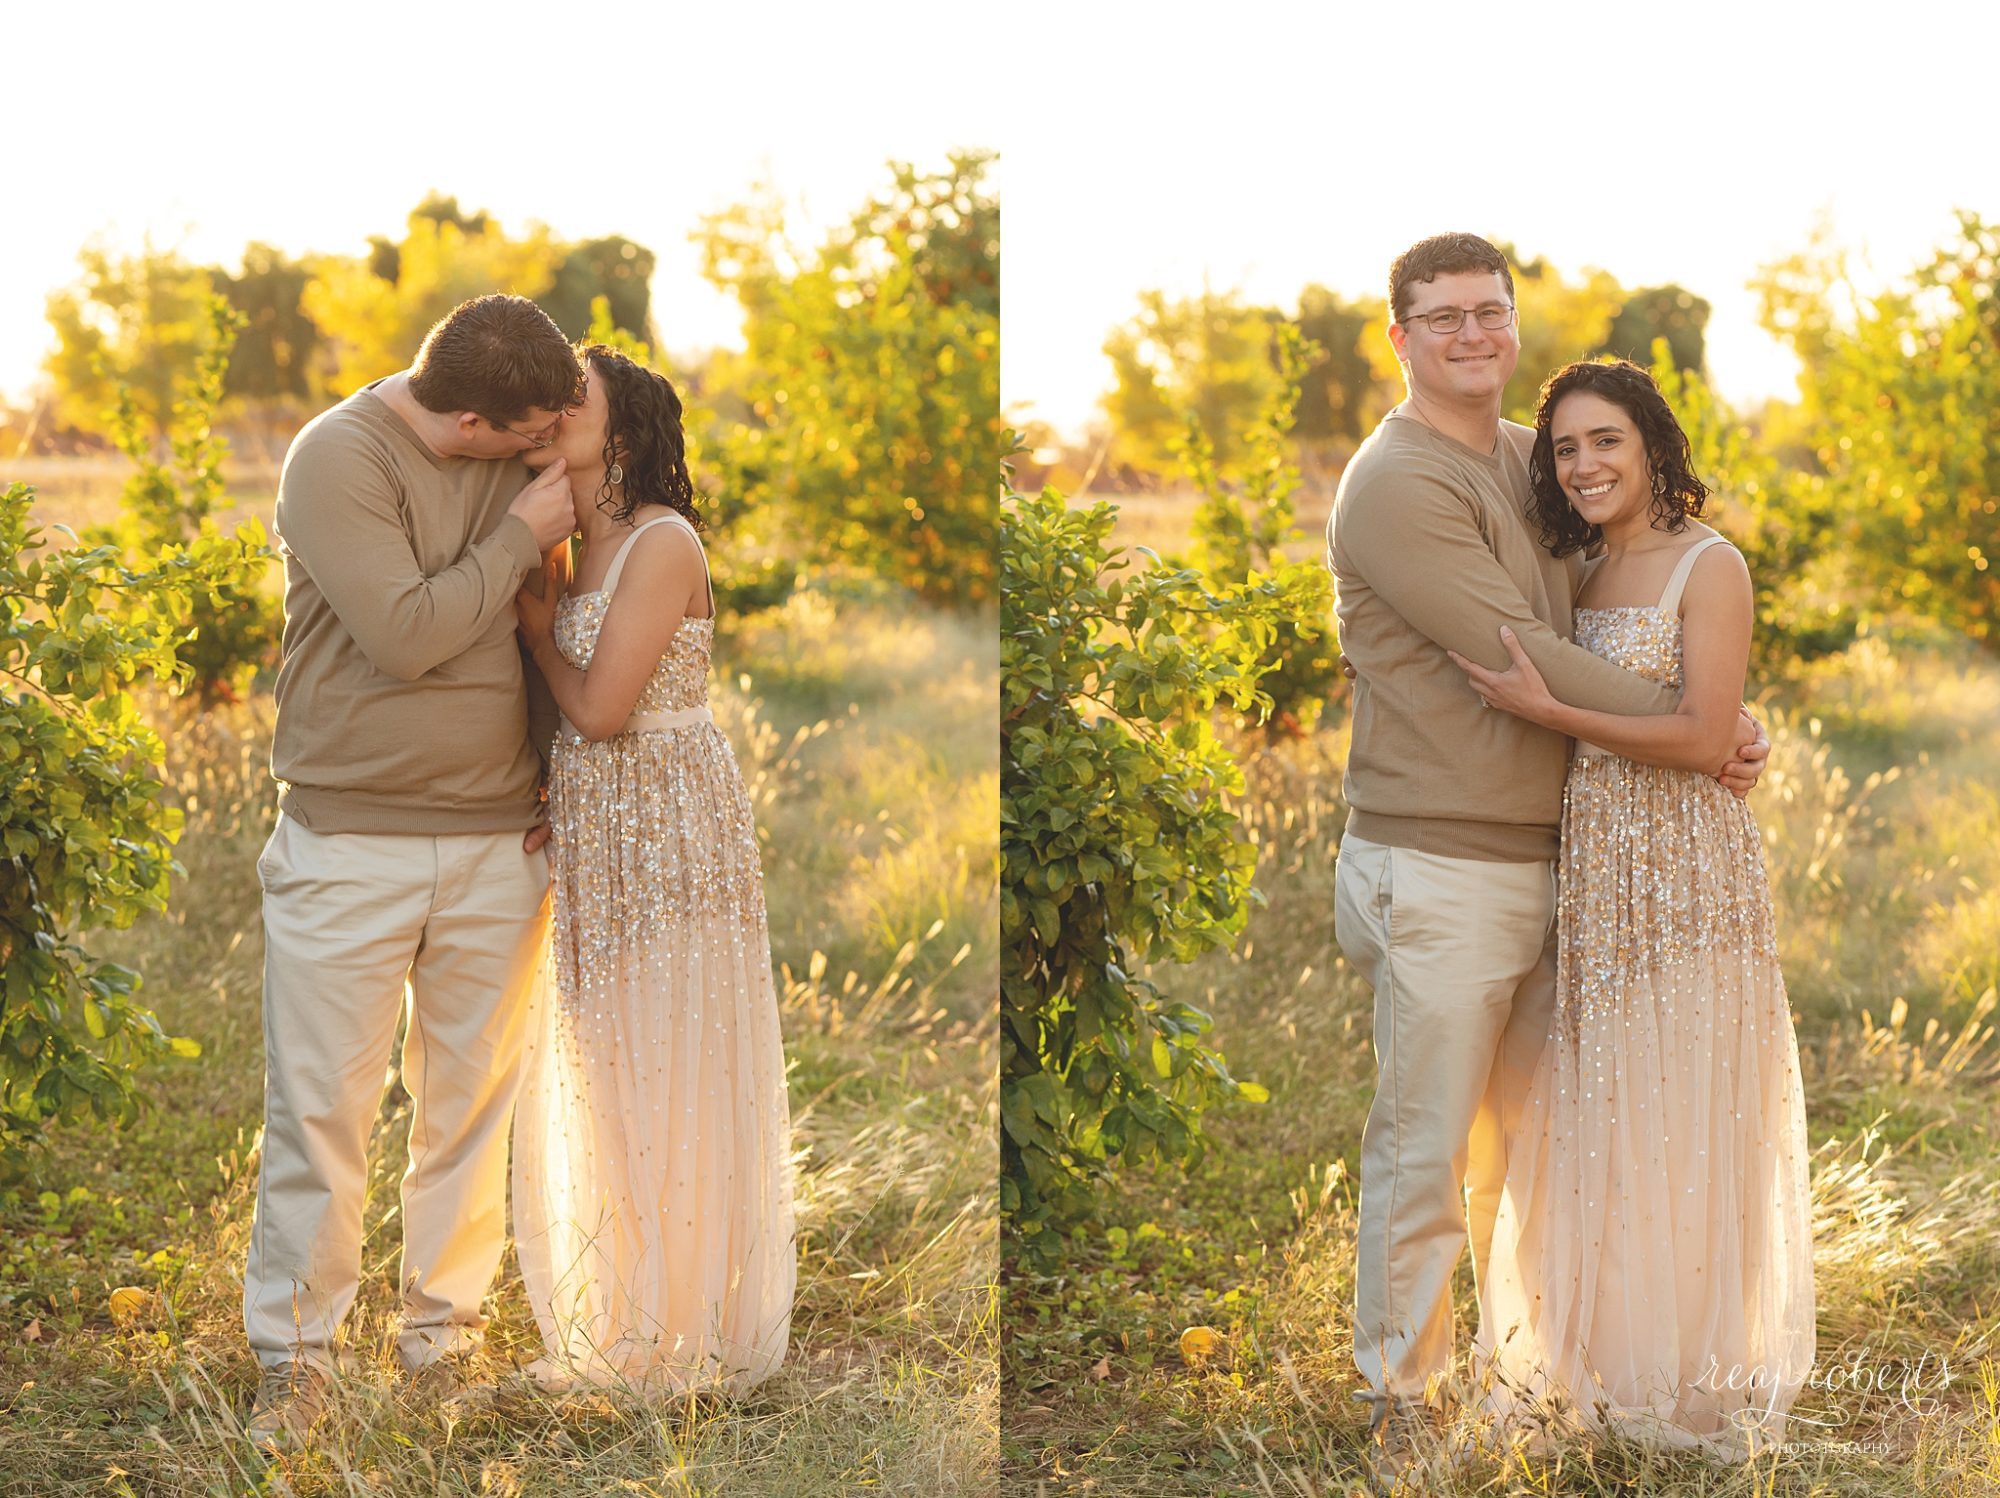 Parent poses in golden sunlight, neutral clothing, tall grass field, orange grove | Phoenix Family Photographer | Reaj Roberts Photography